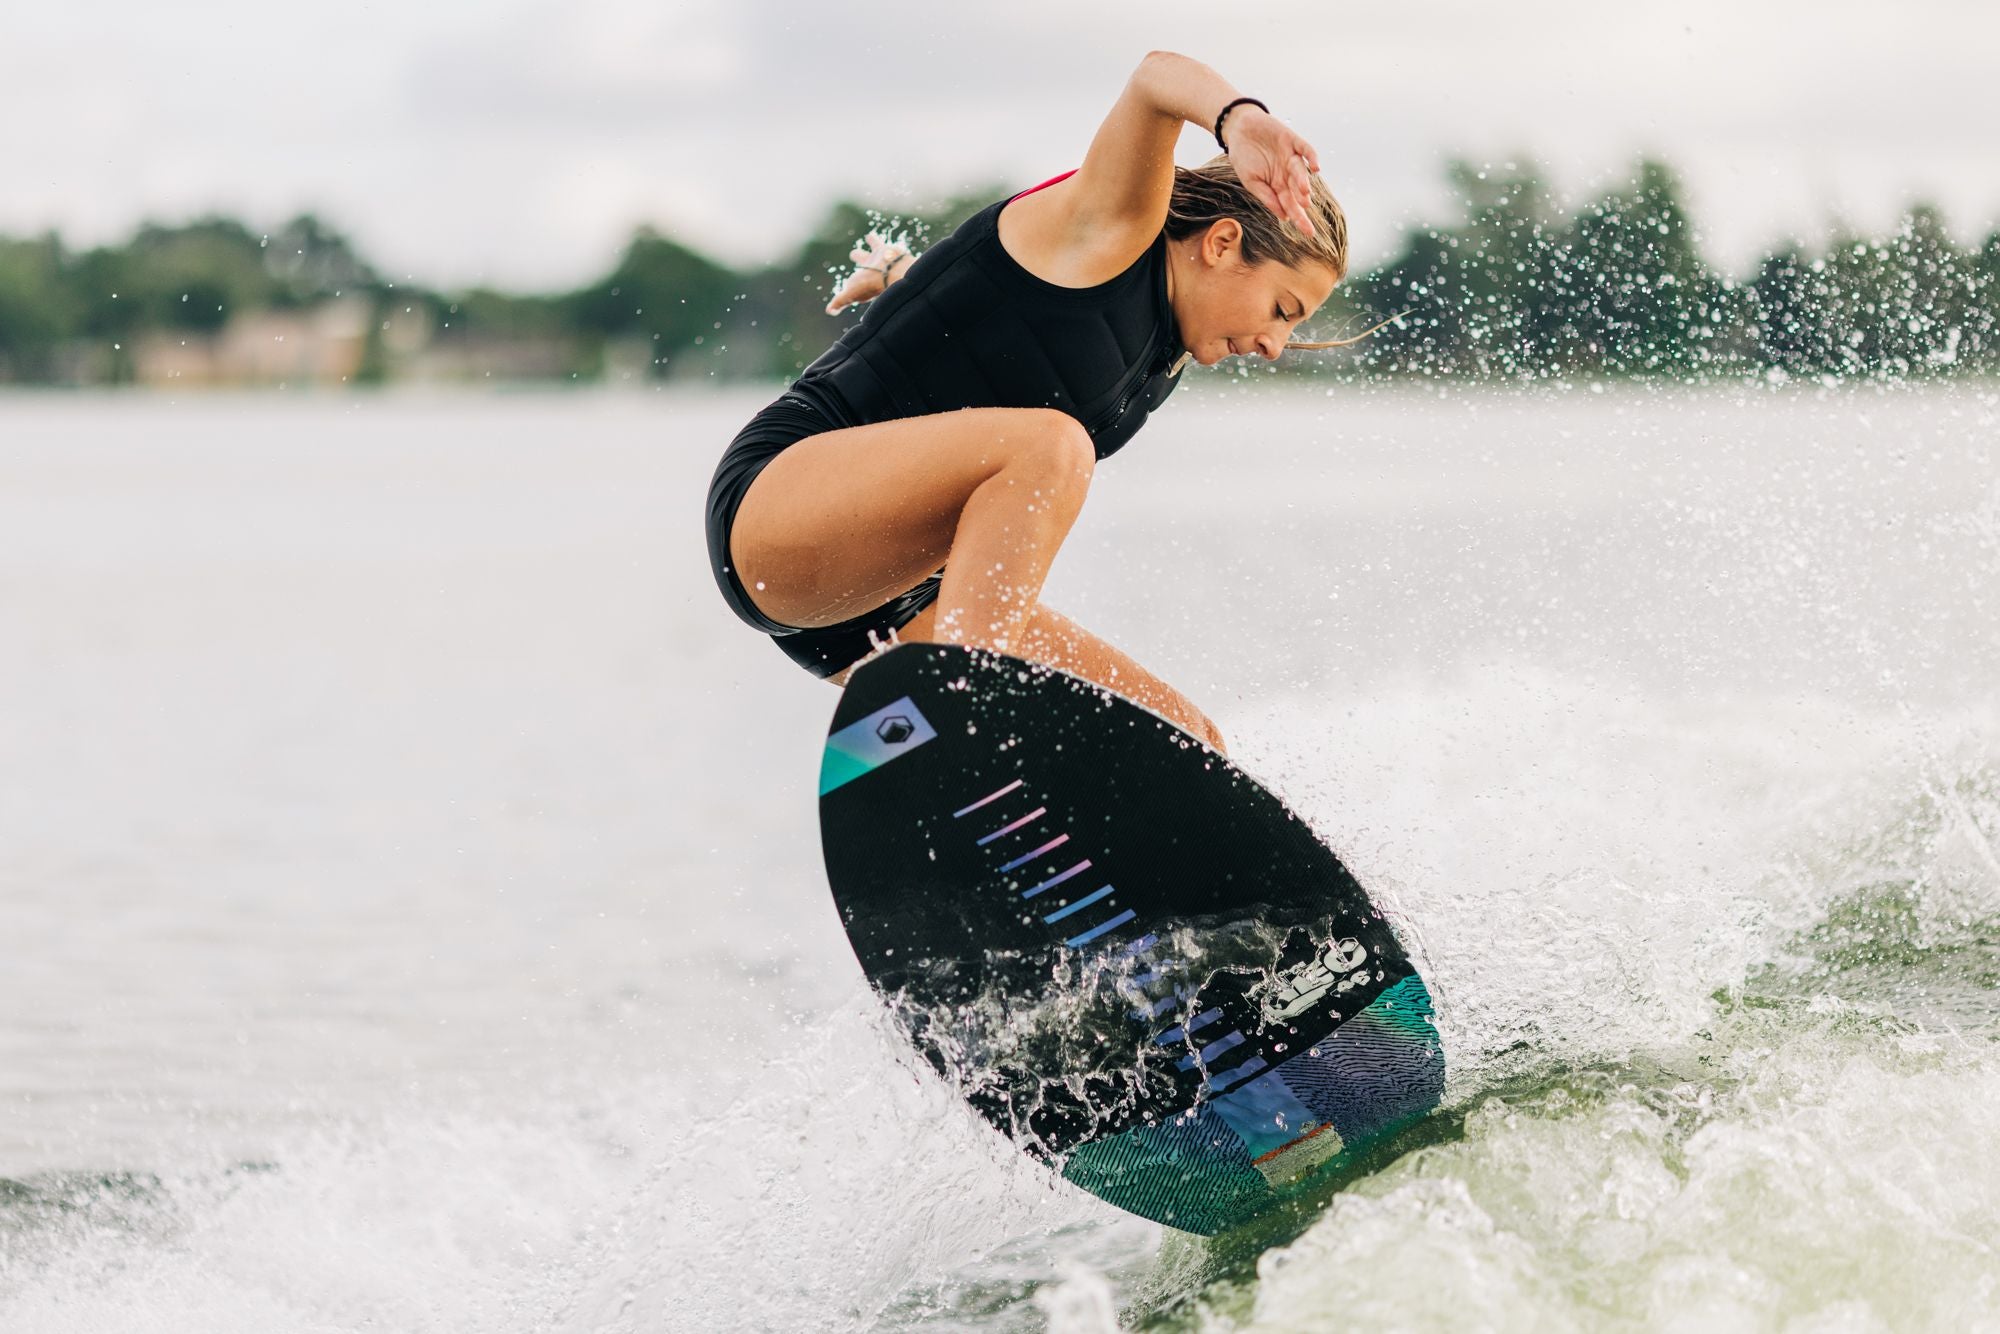 A Liquid Force 2023 Neo lightweight woman skim surfer gracefully riding a wakeboard on a serene lake.